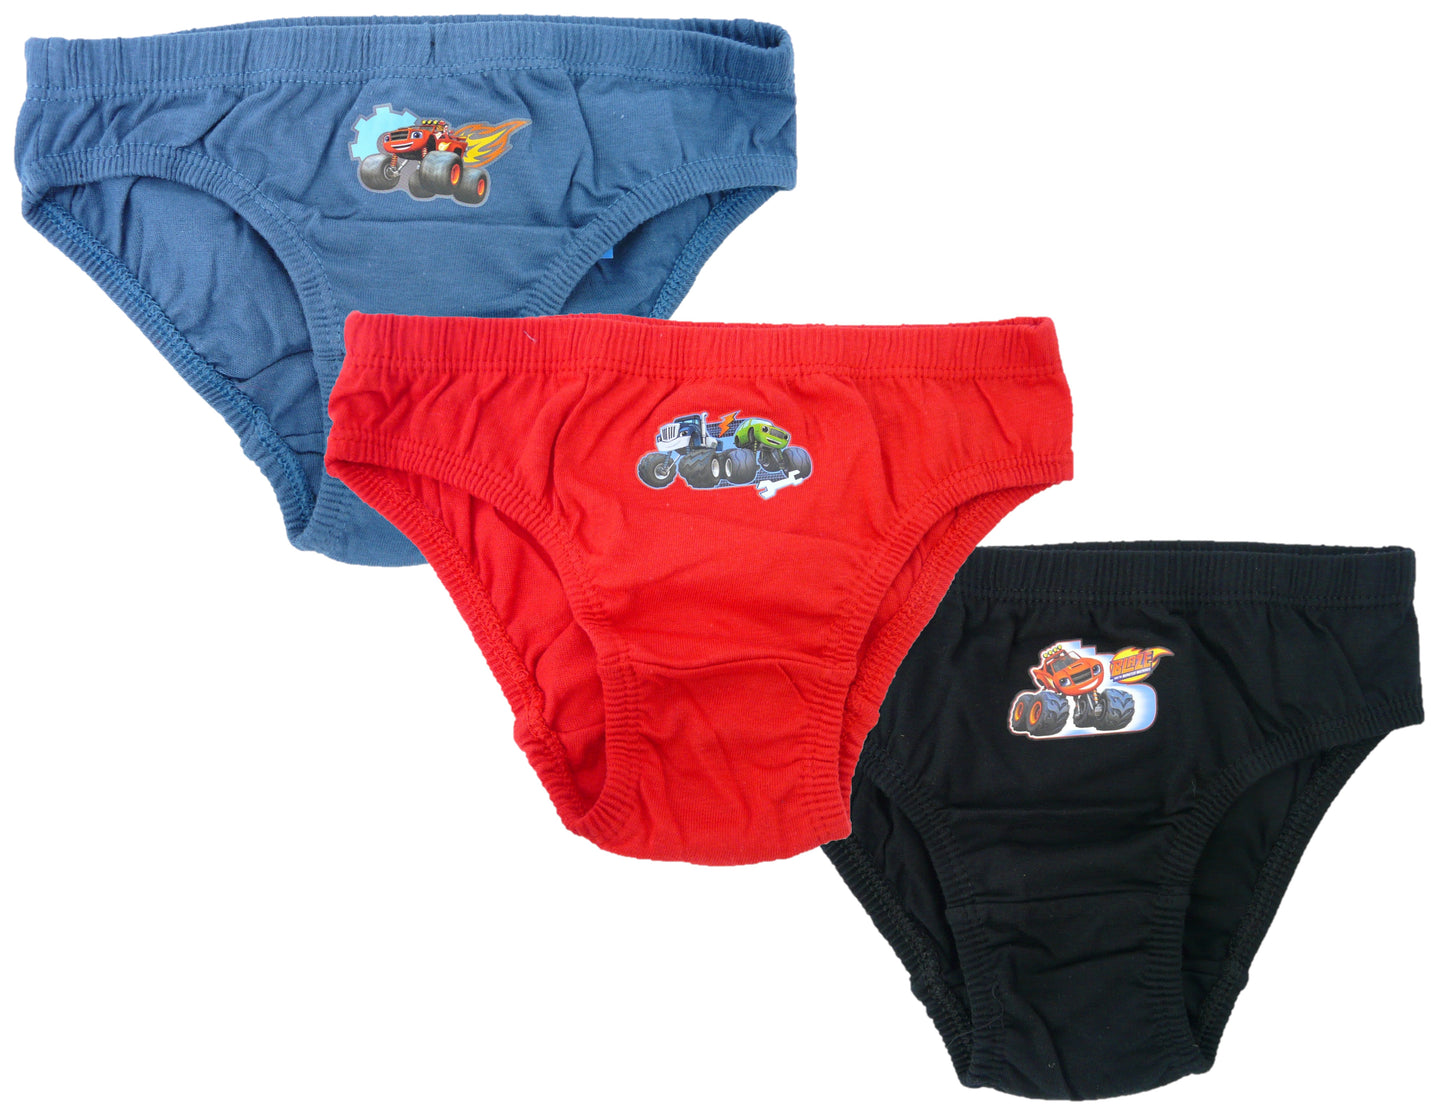 Blaze and the Monster Machines Boys 3 Pack Briefs 7-8 Years